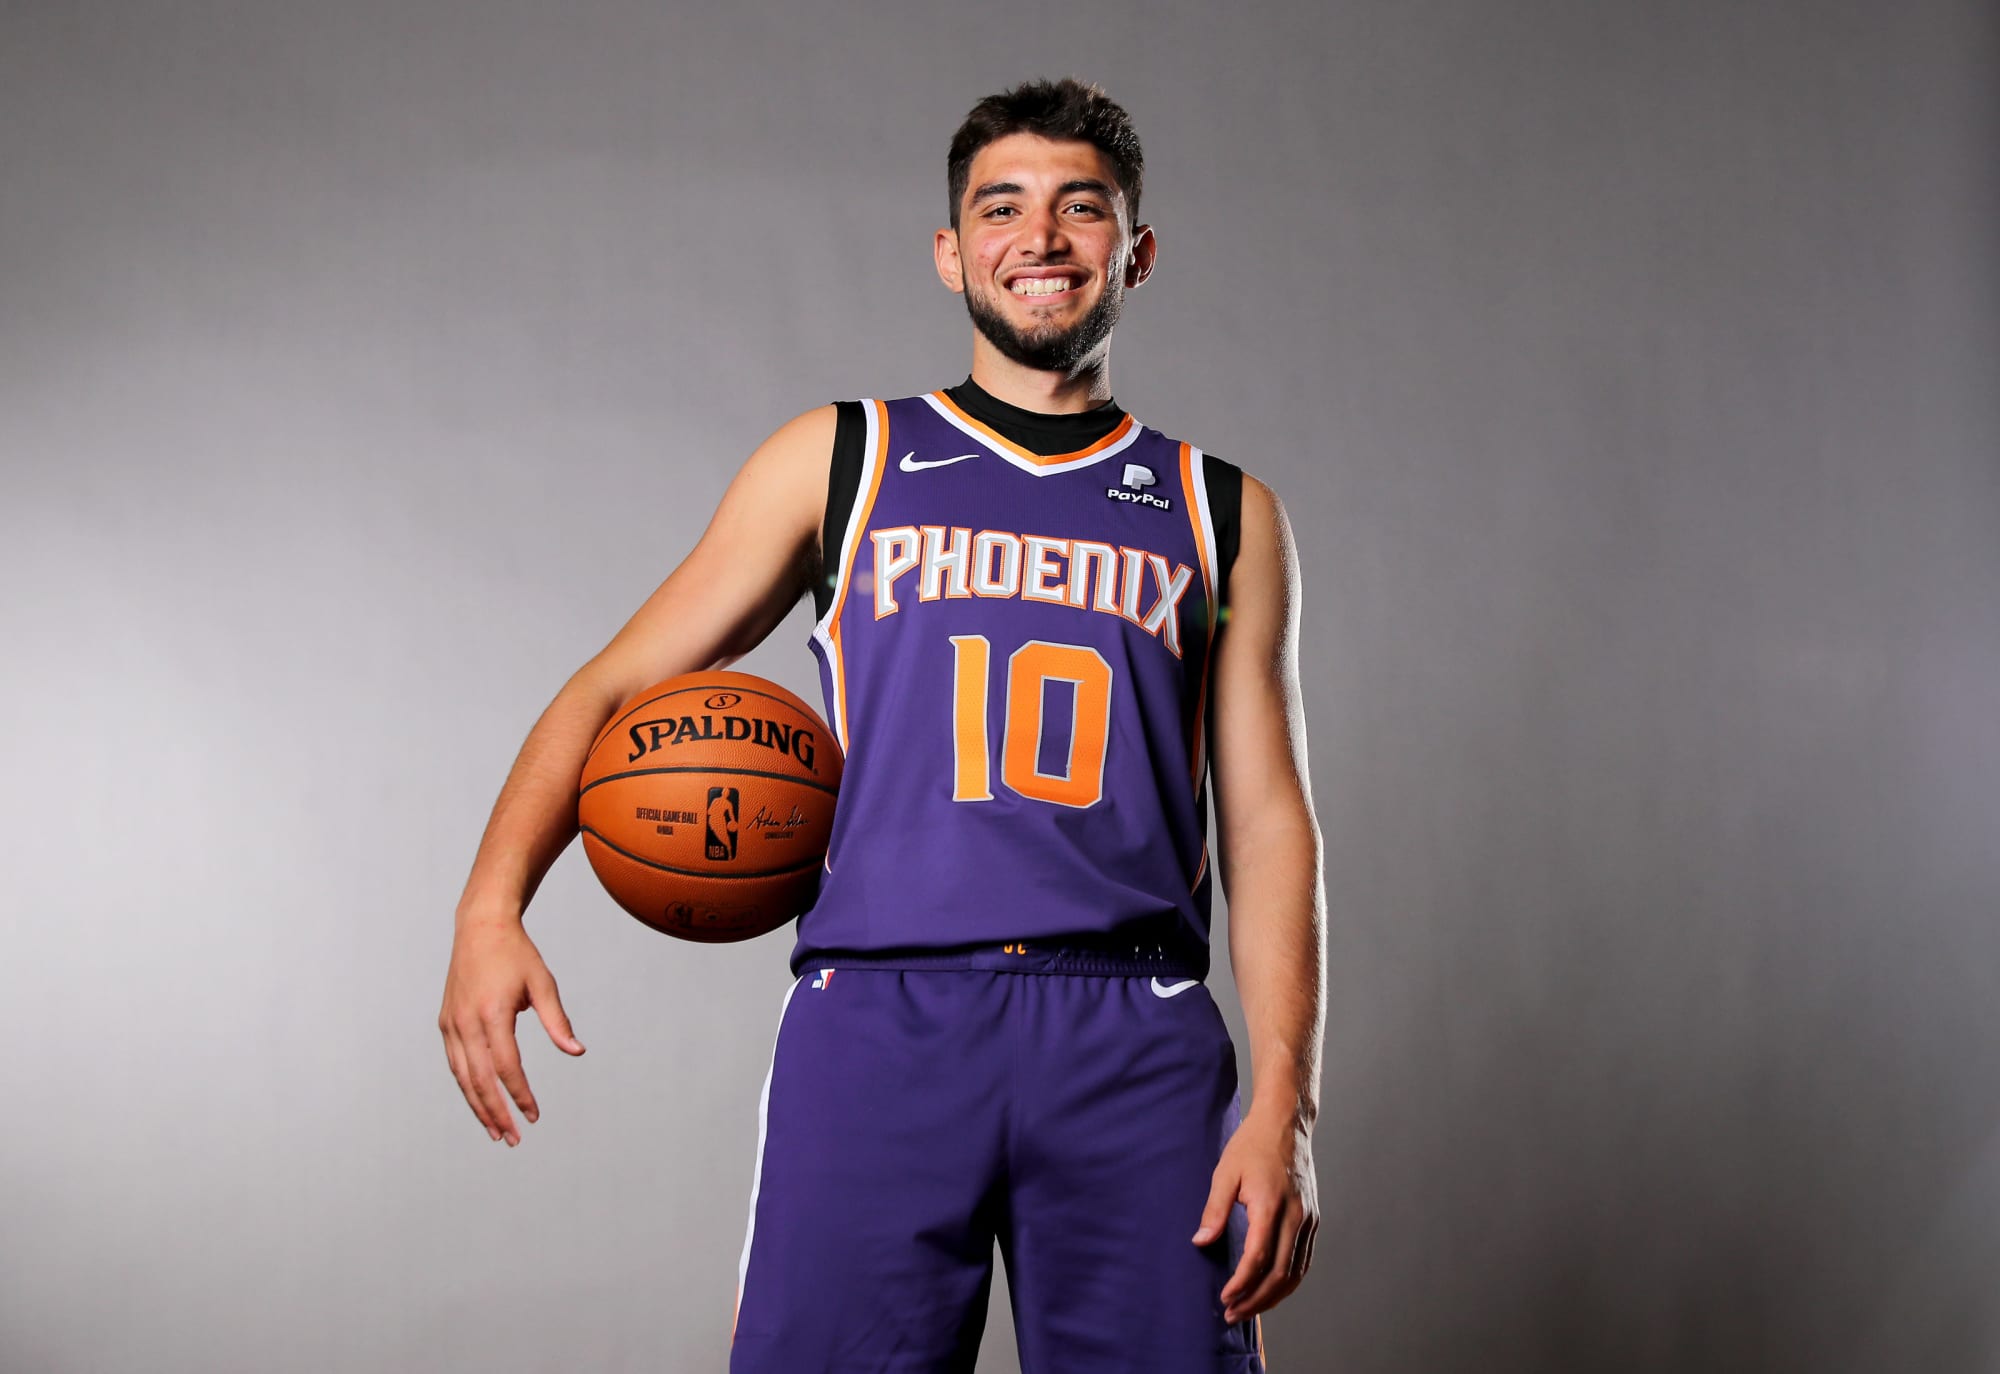 Reminder The Phoenix Suns have the youngest roster in the NBA